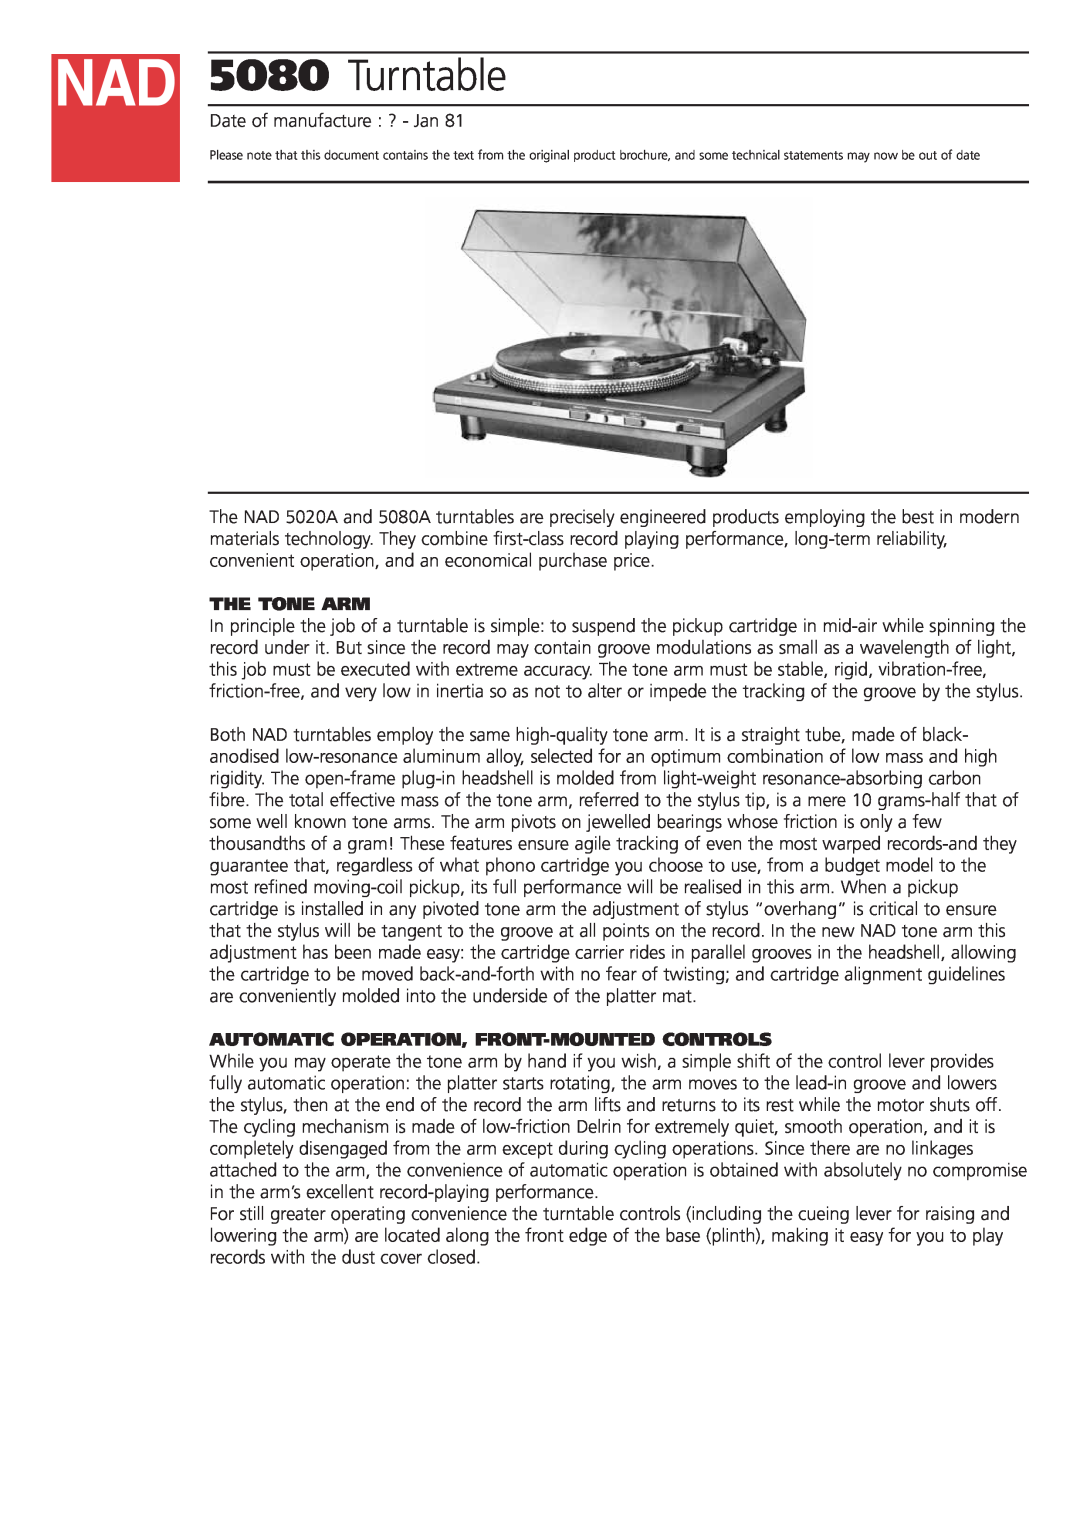 NAD 5080 brochure The Tone Arm, Automatic Operation, Front-Mountedcontrols, Turntable 